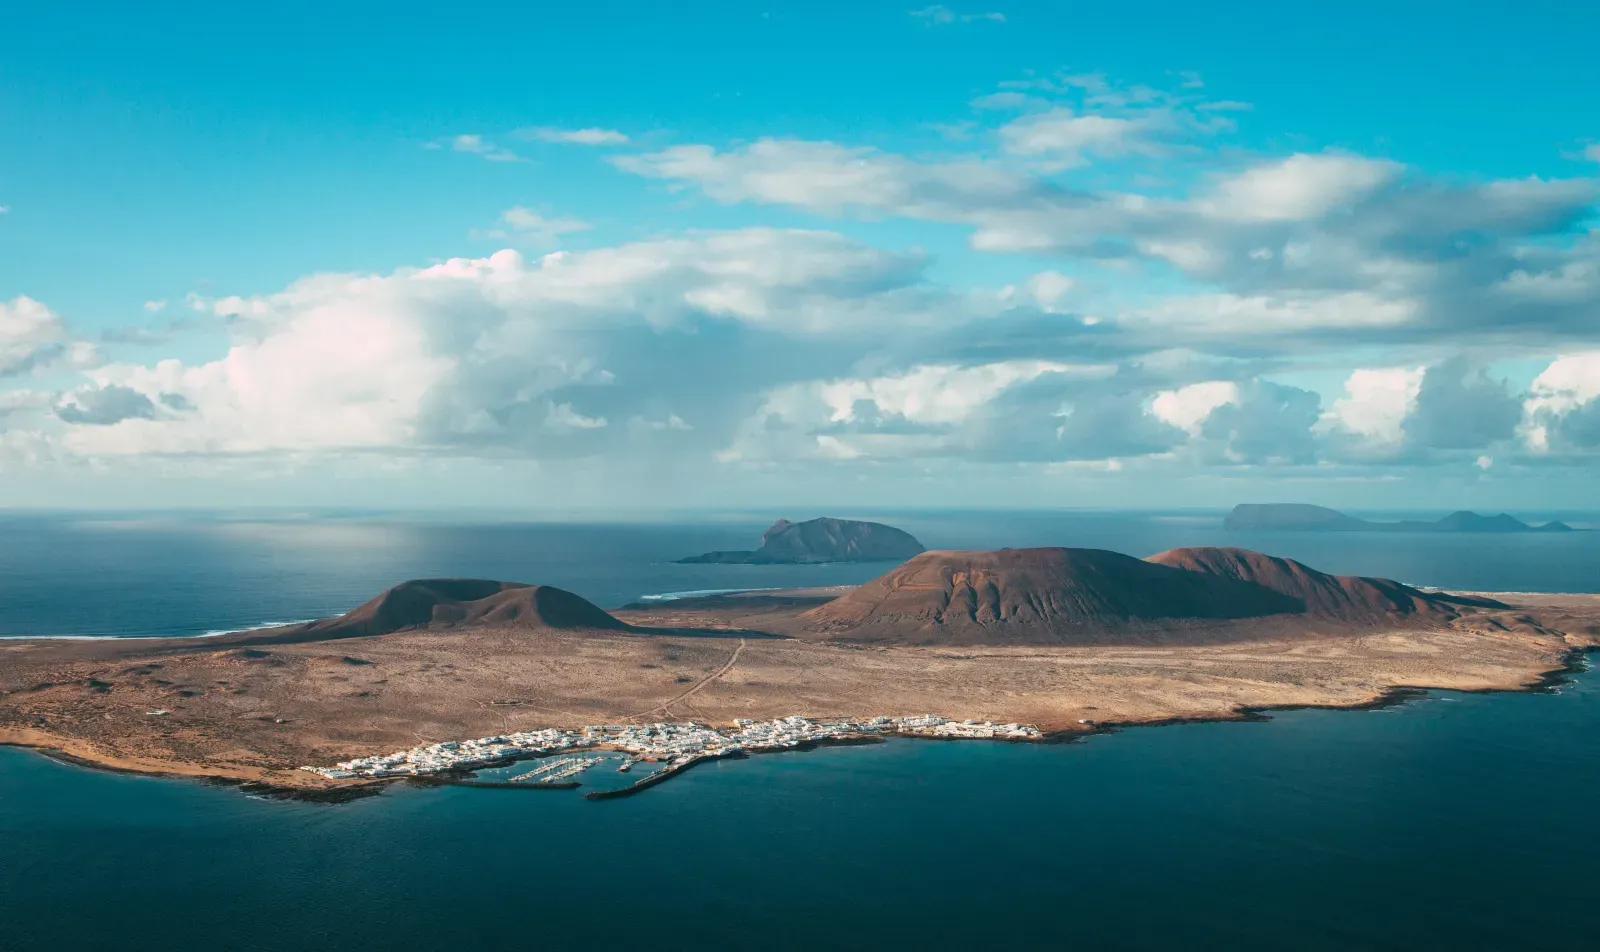 Lanzarote Island seen from above